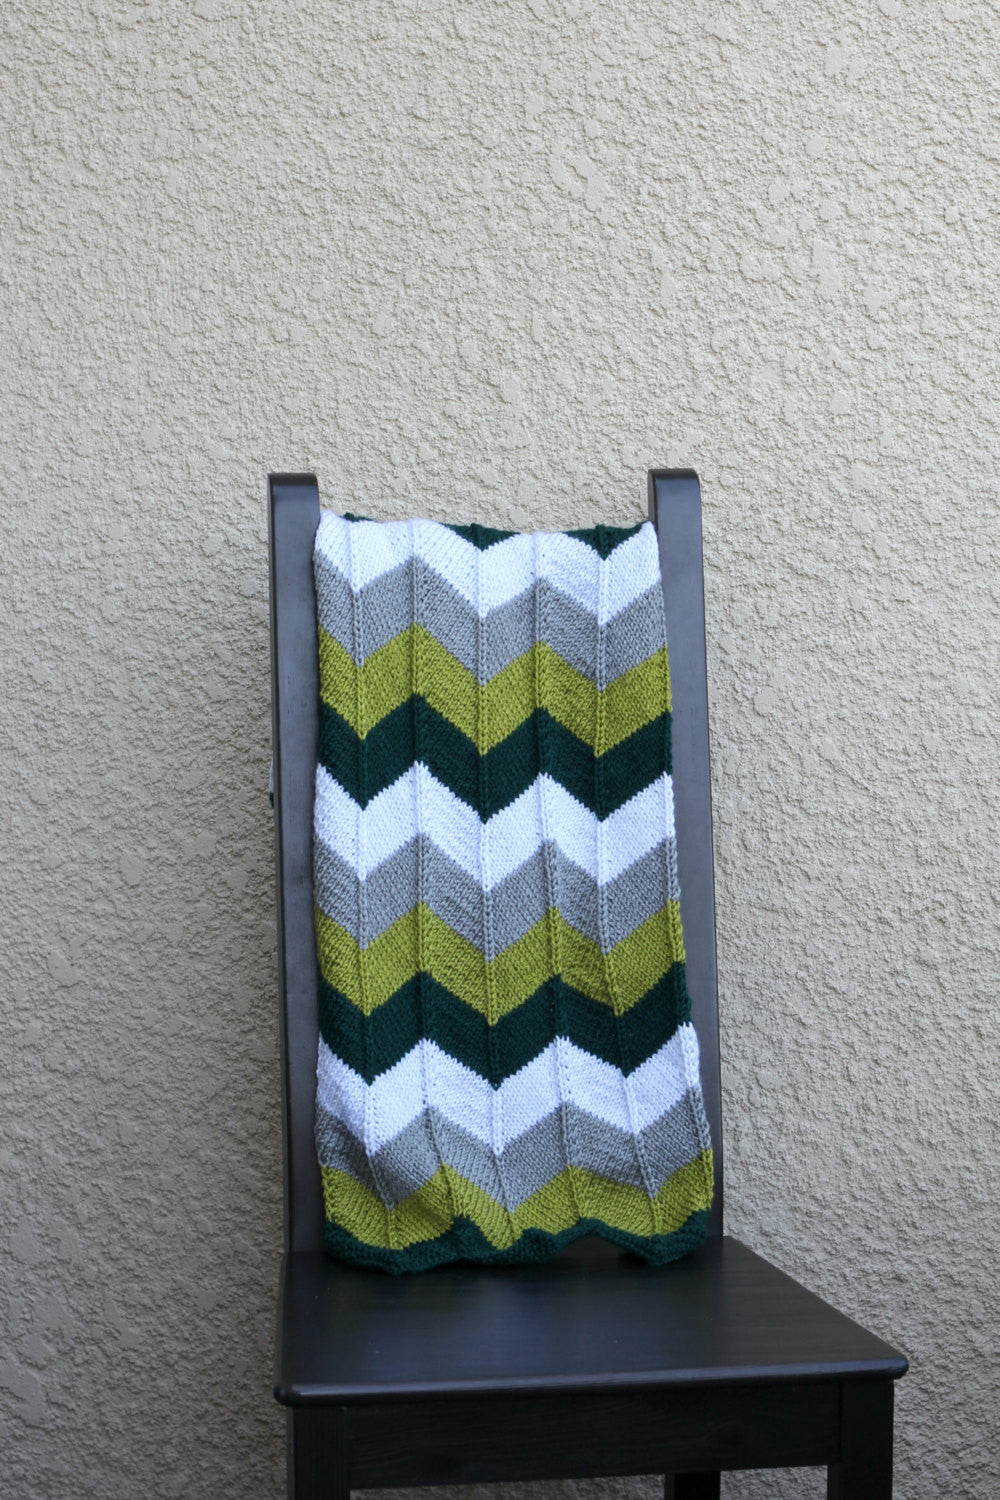 Knit baby blanket in green colors